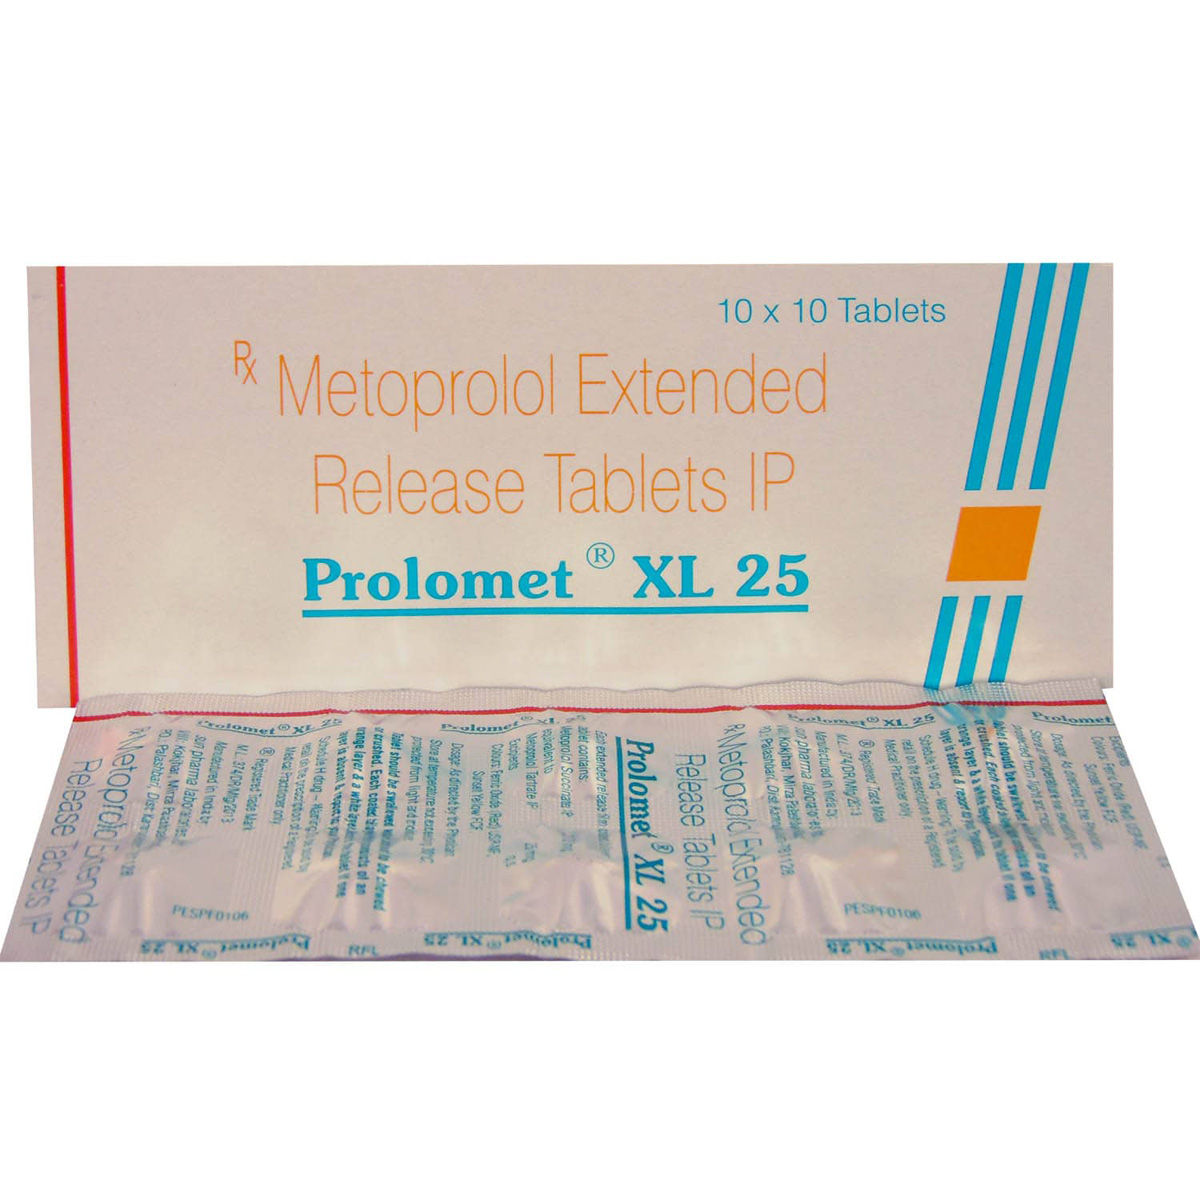 Prolomet Xl 50 MG Tablet XL - Uses, Dosage, Side Effects, Price,  Composition